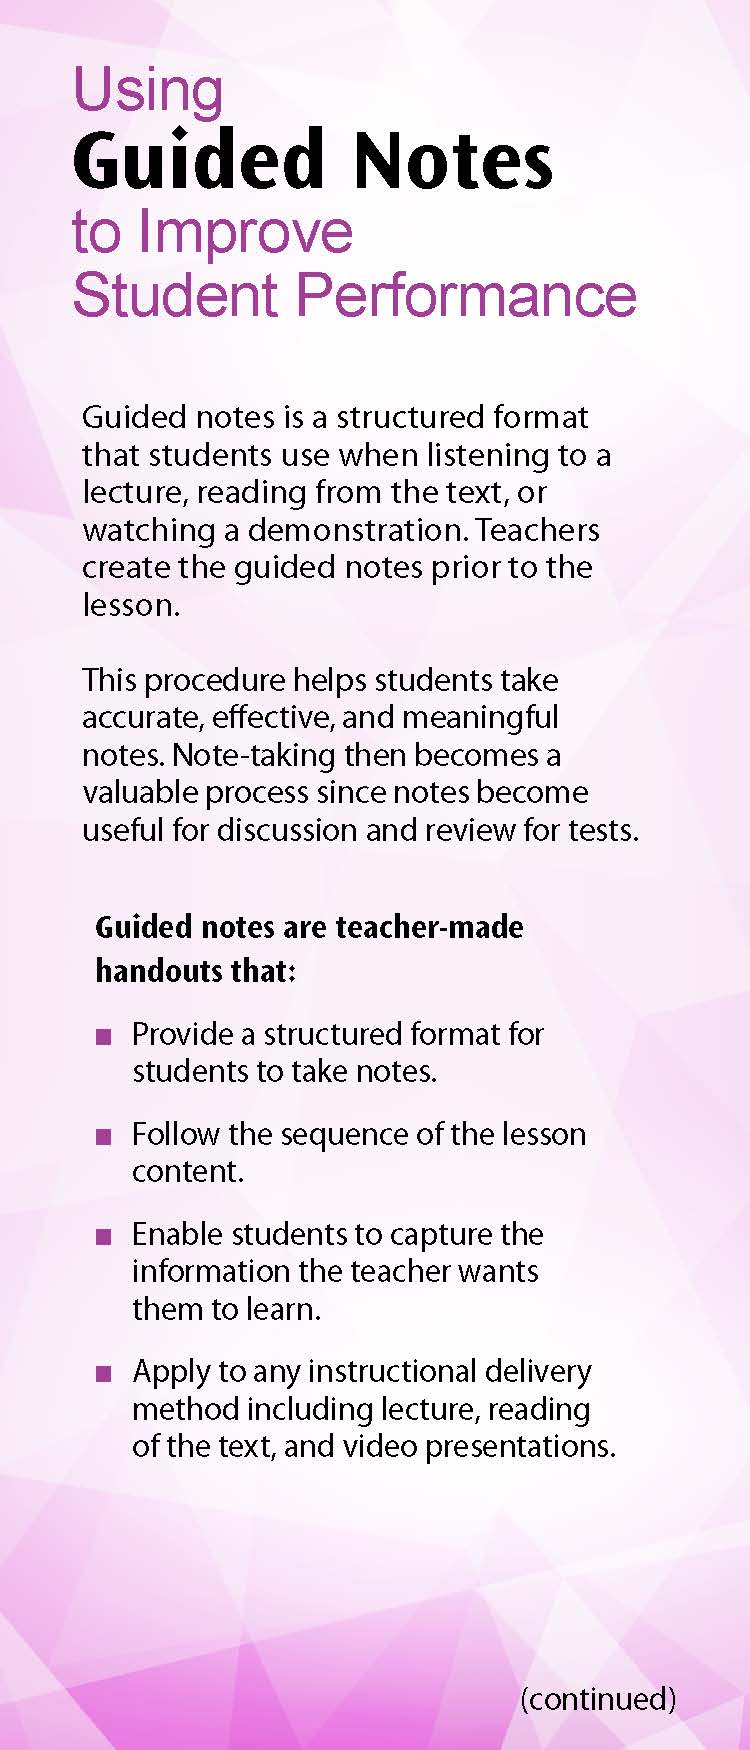 Using Guided Notes to Improve Student Performance